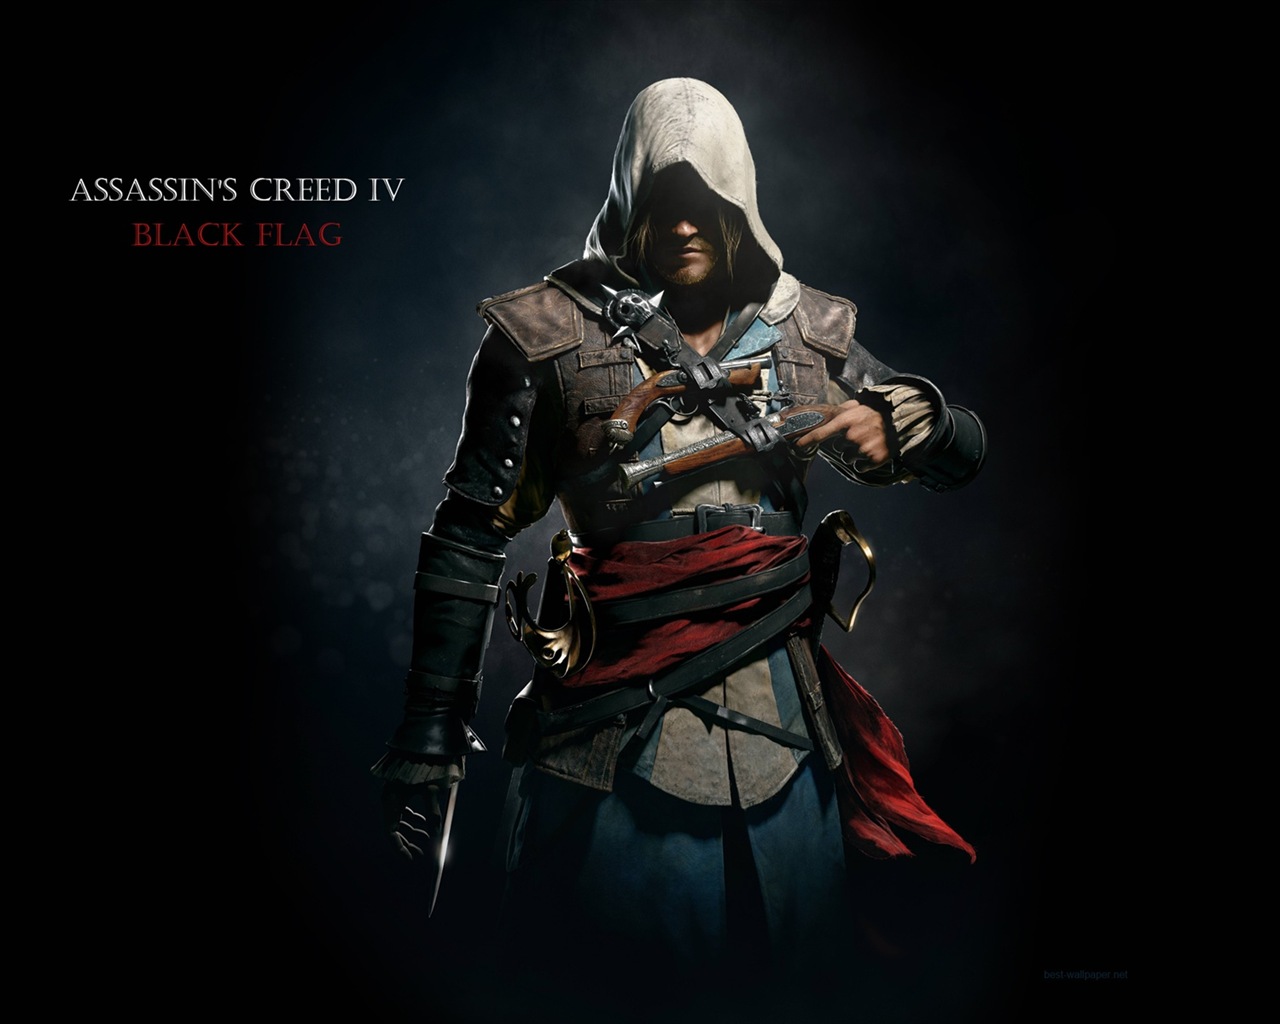 Assassin's Creed IV: Black Flag HD wallpapers #9 - 1280x1024